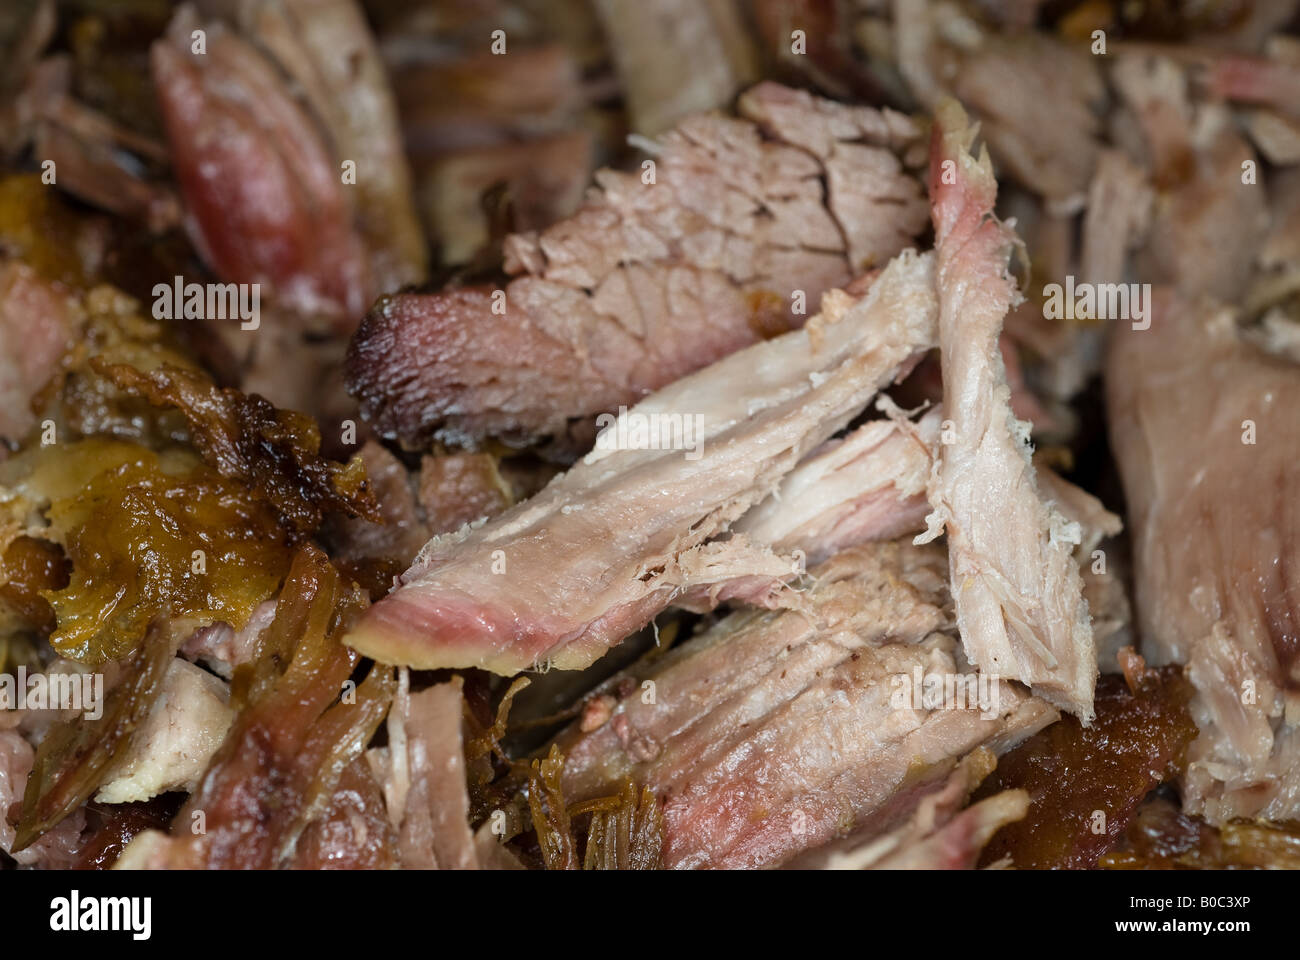 Pork chunks wait to be consumed in tacos and burritos at a fiesta Stock Photo